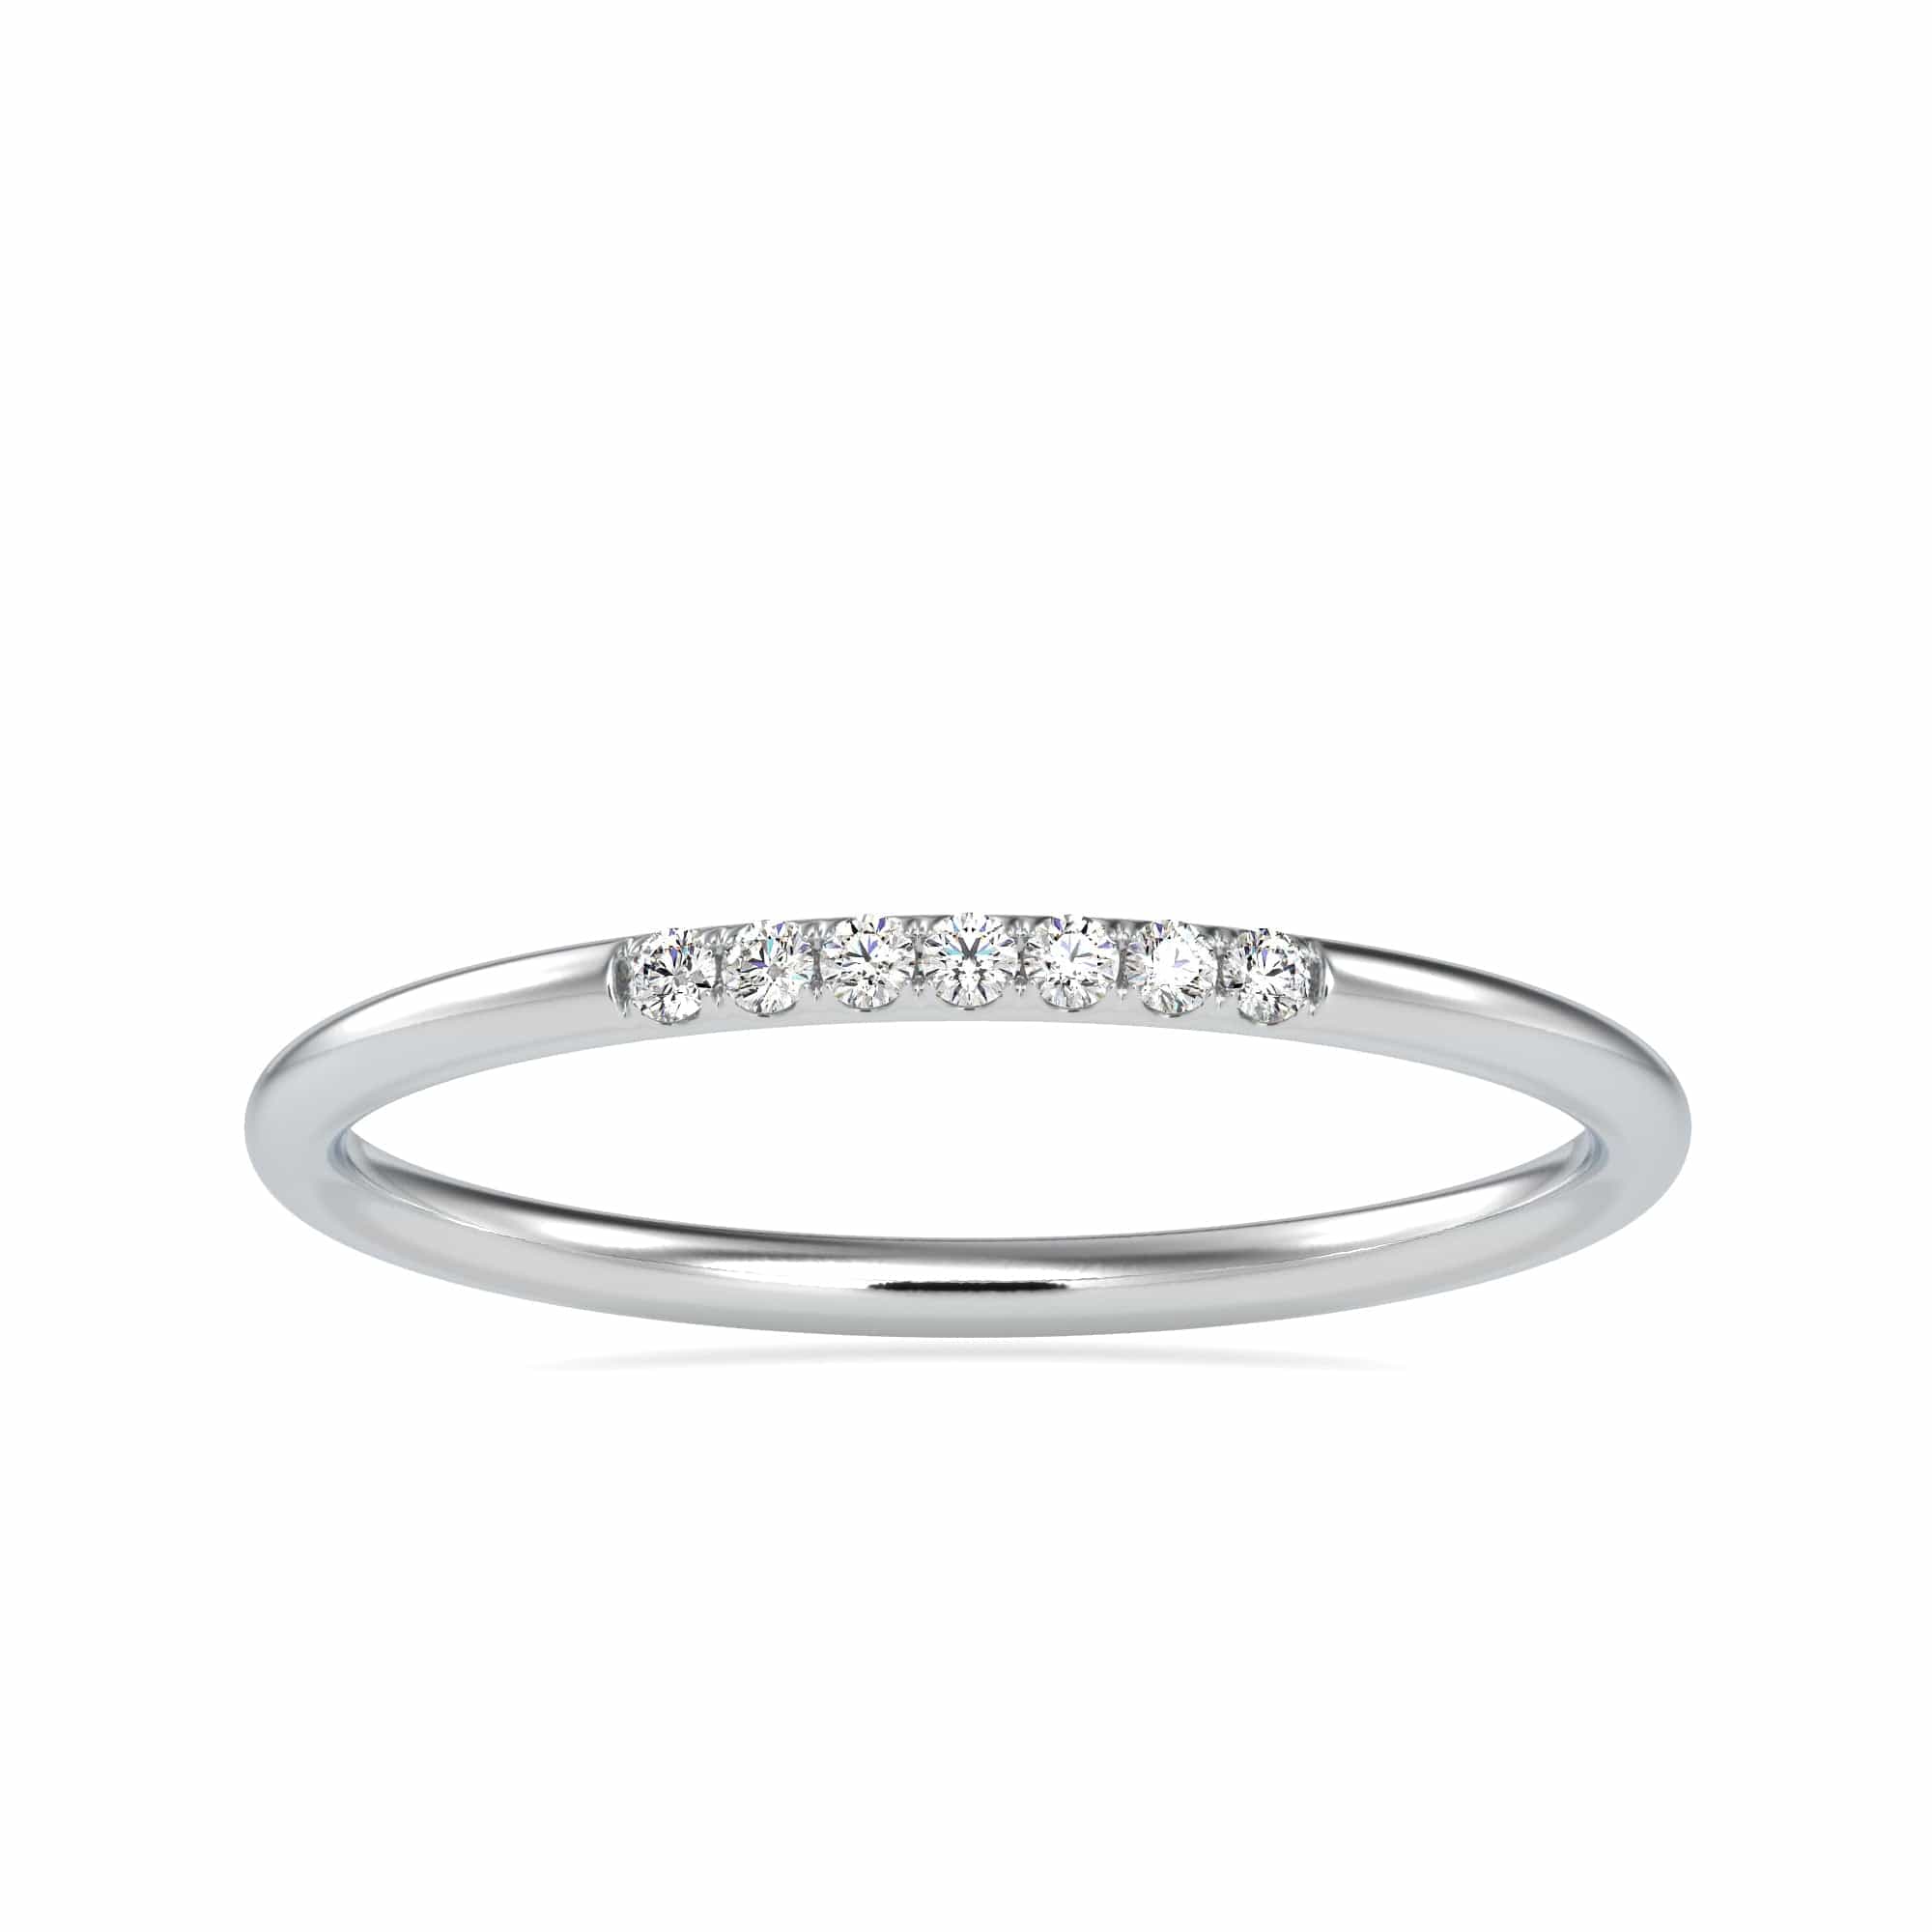 5 Stone American Diamond Band Ring at Affordable Price